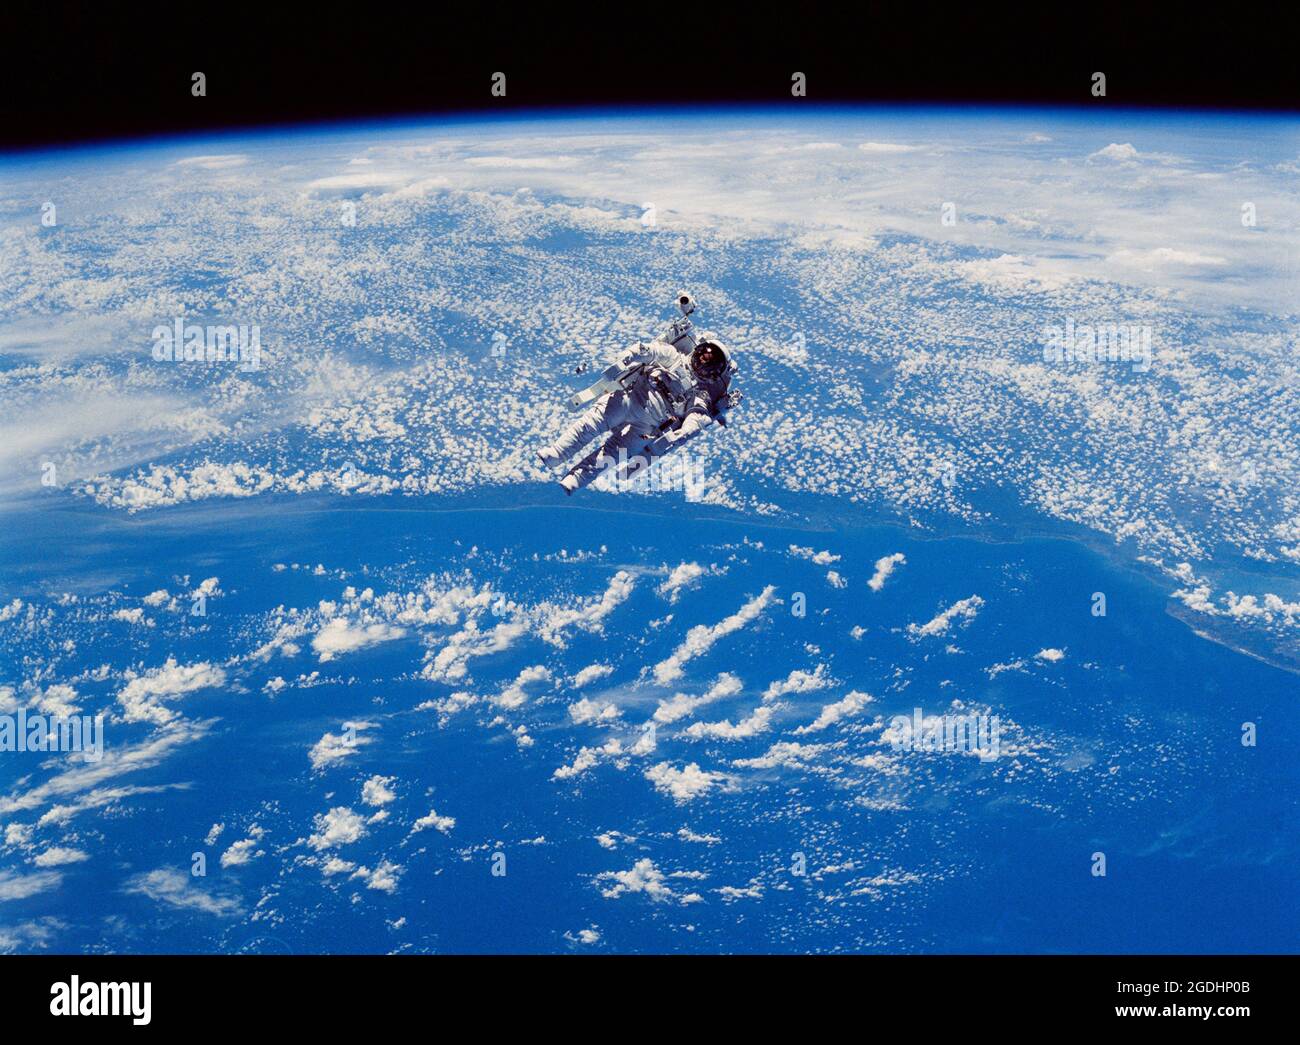 An astronaut flying free from the space shuttle using his jetpack (Manned Manuevering Unit or MMU). Stock Photo